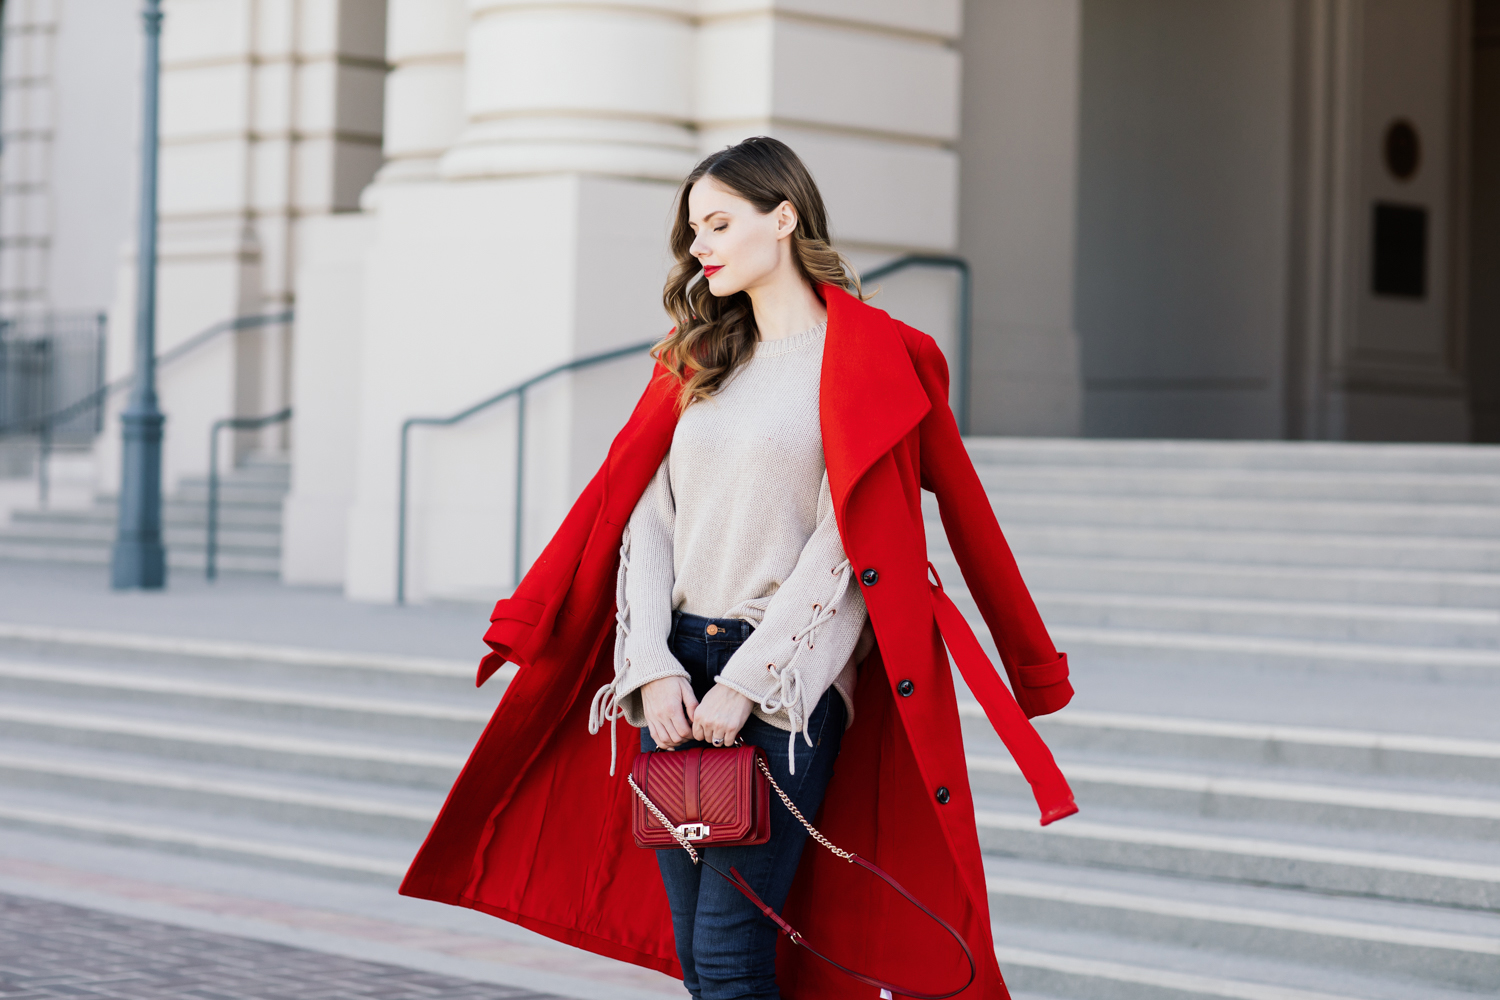 Alyssa Campanella of The A List blog wears Yumi Kim Undercover Red Coat, Jeffrey Campbell Siren boots, and See by Chloe lace up sweater